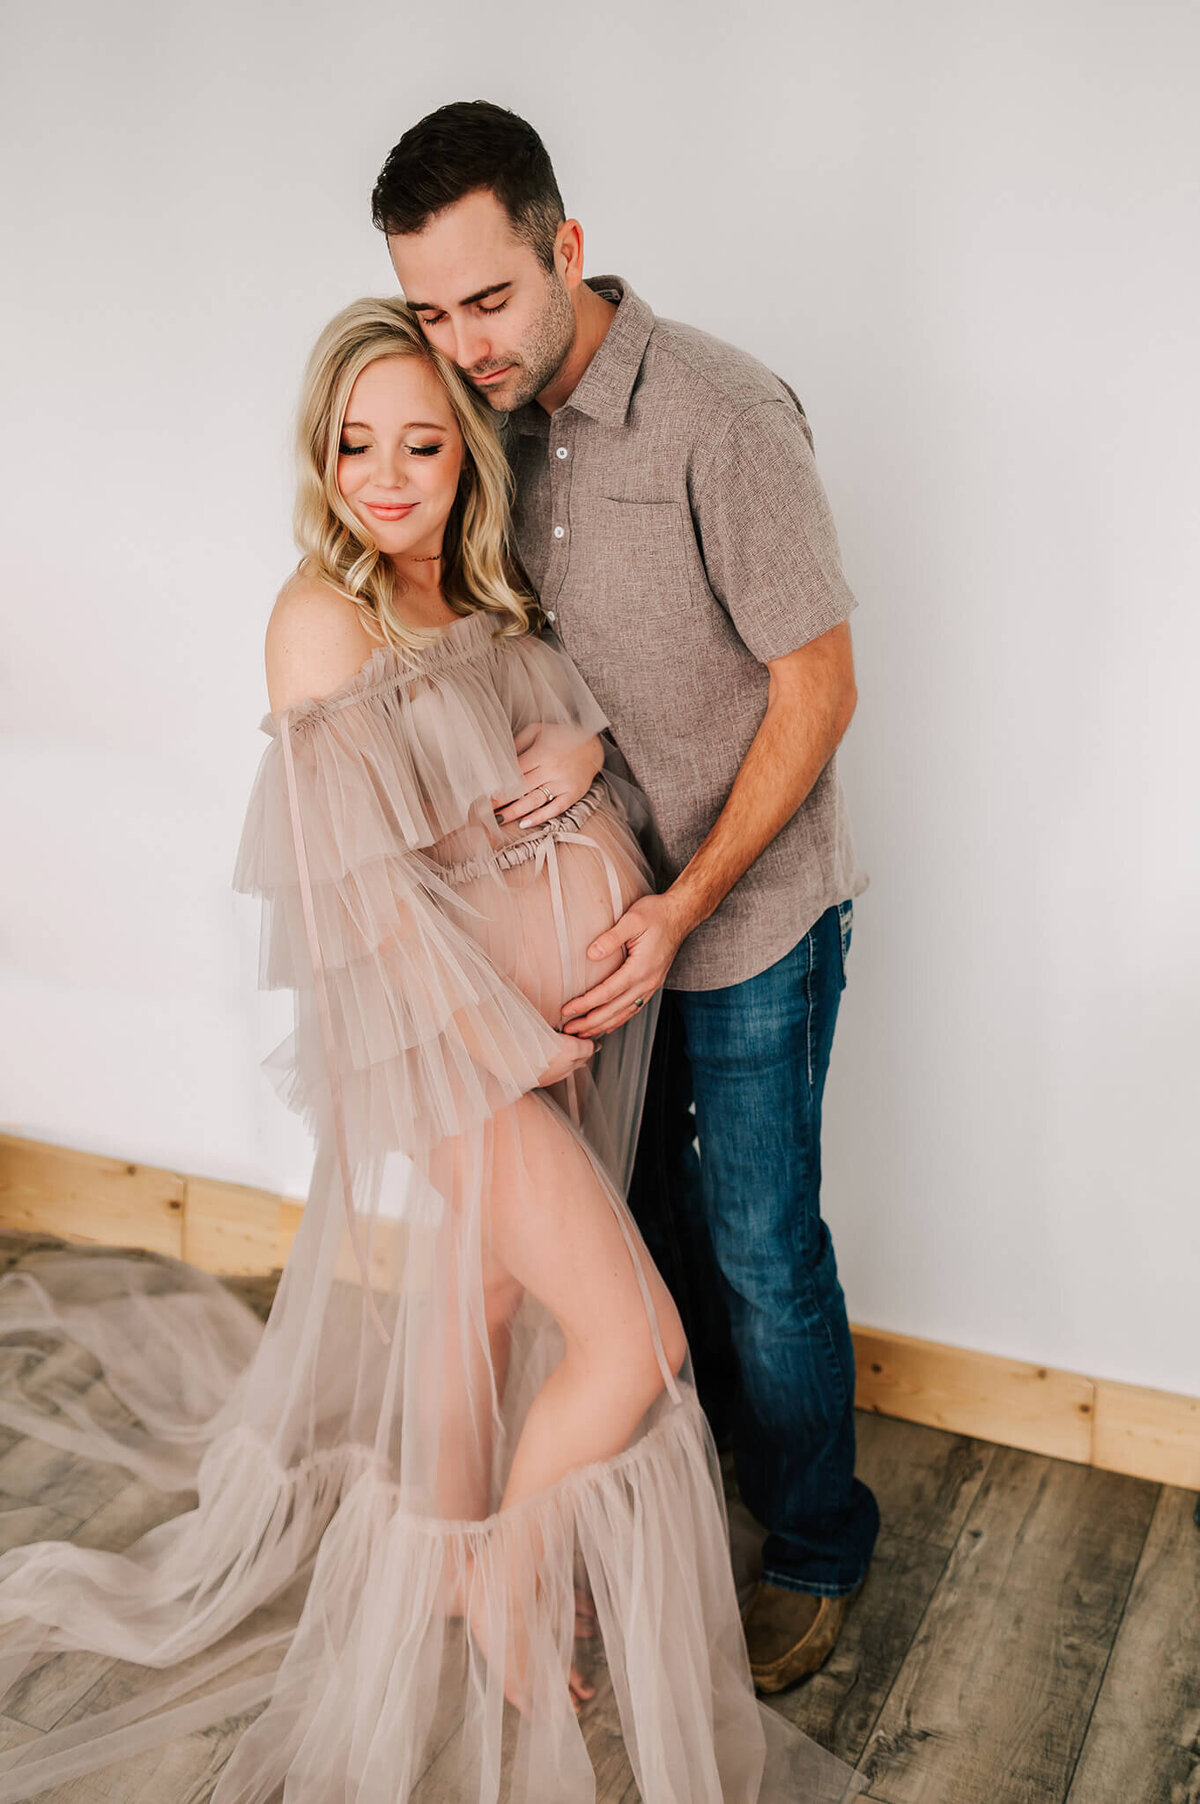 Springfield MO maternity photographer captures pregnant couple standing holding baby bump